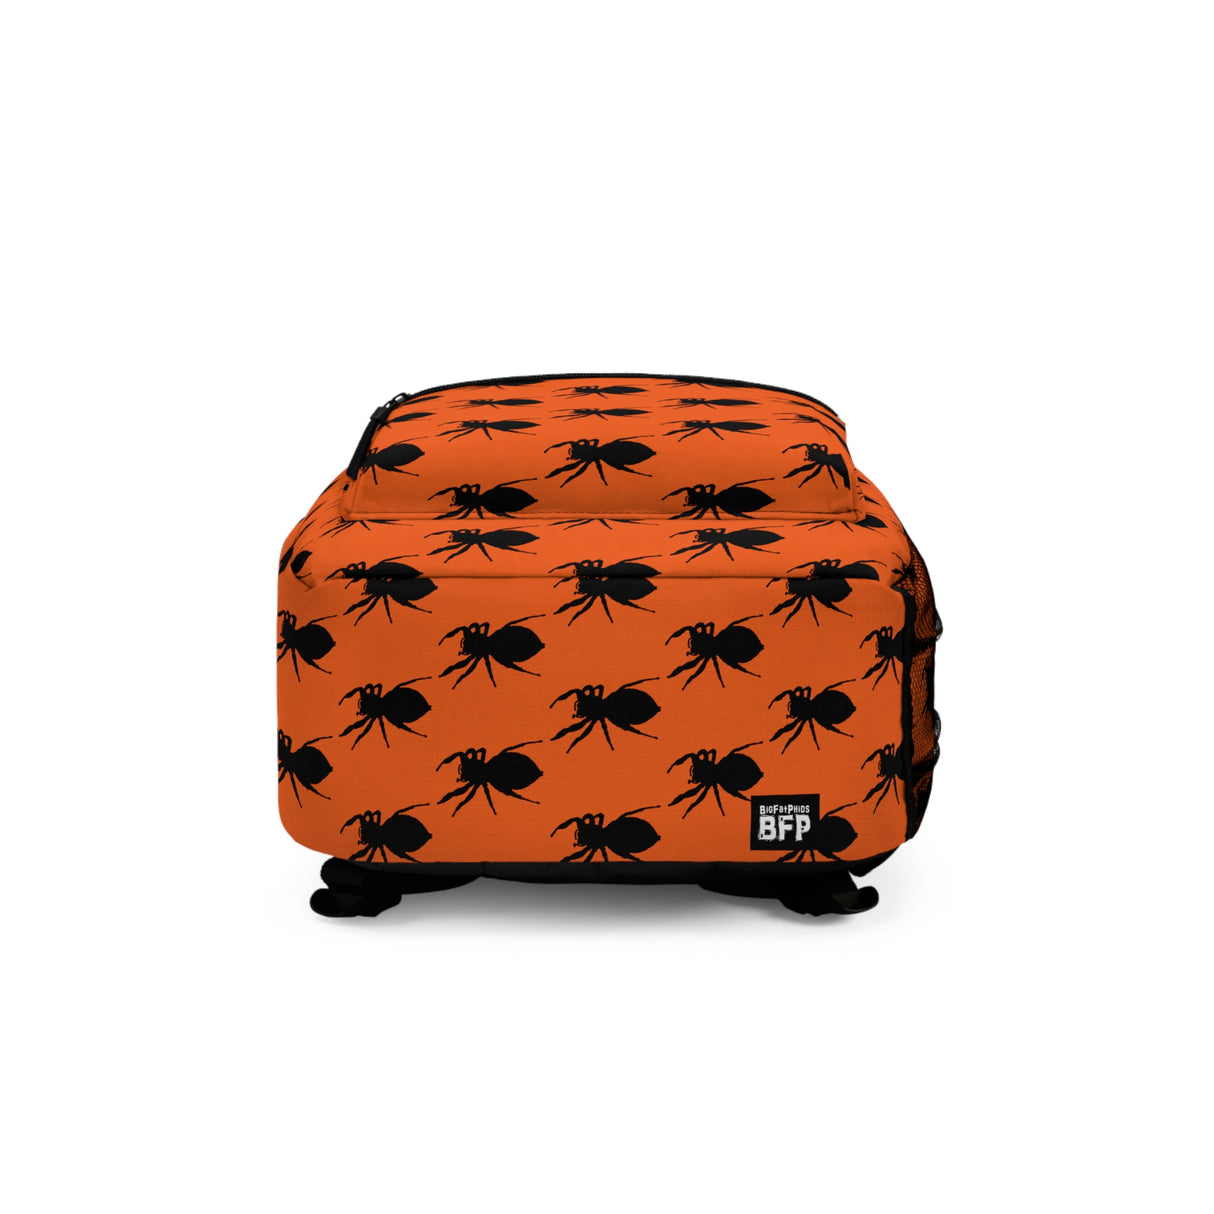 Jumping Spider Print Backpack on Orange Background Made in USA